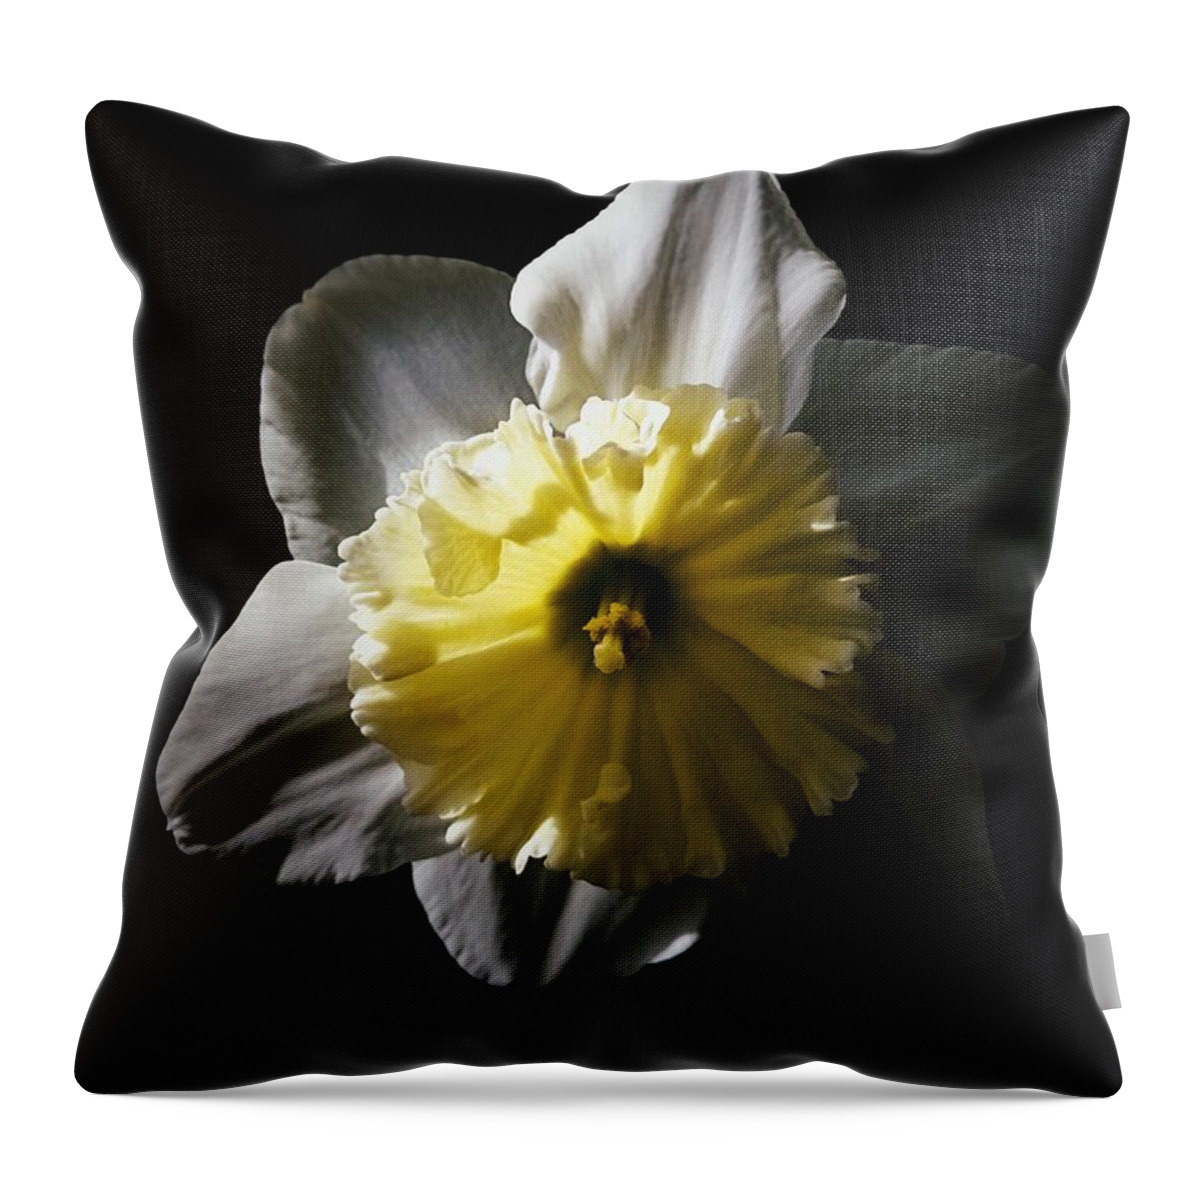 Daffodil Throw Pillow featuring the photograph Daffodil By Sunlight by Brad Hodges